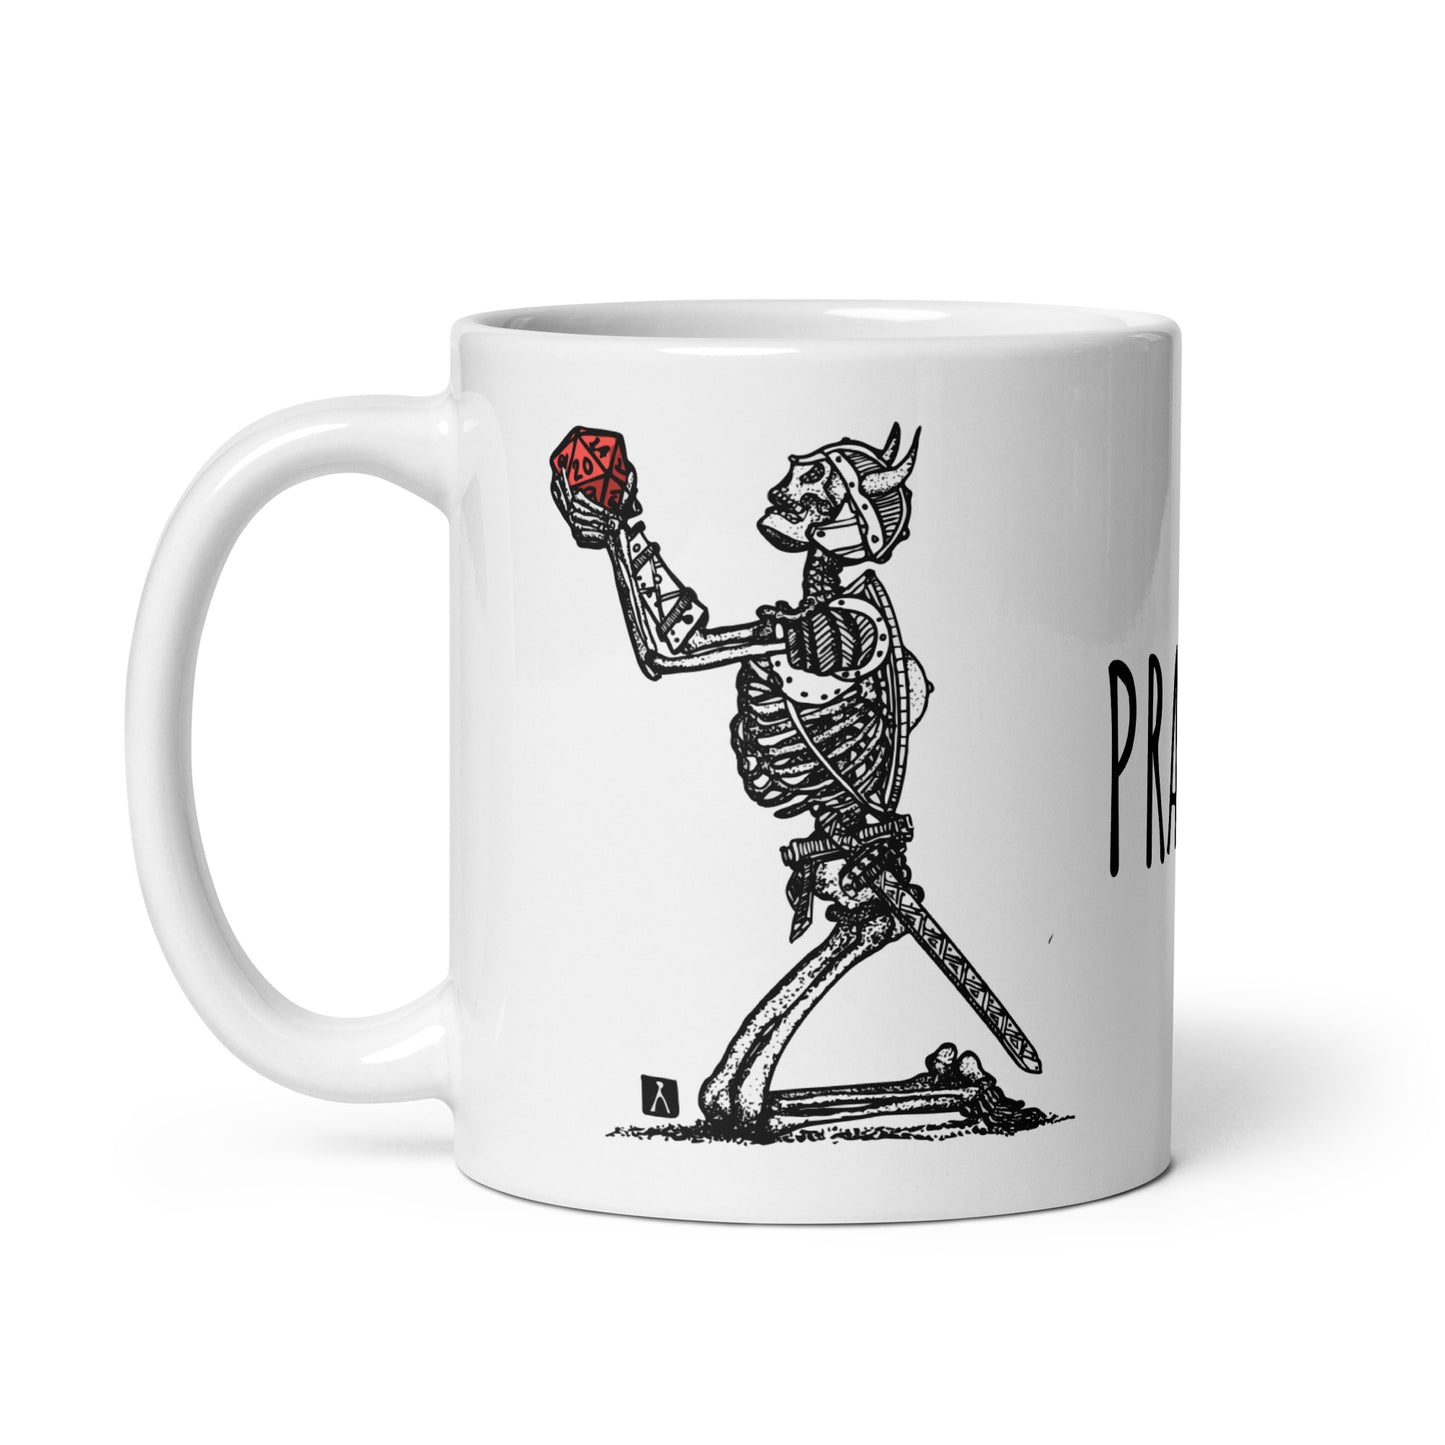 BellavanceInk: Coffee Mug With Pen & Ink Drawing Of A Skeleton Warrior Praying For A D20 Dice Roll